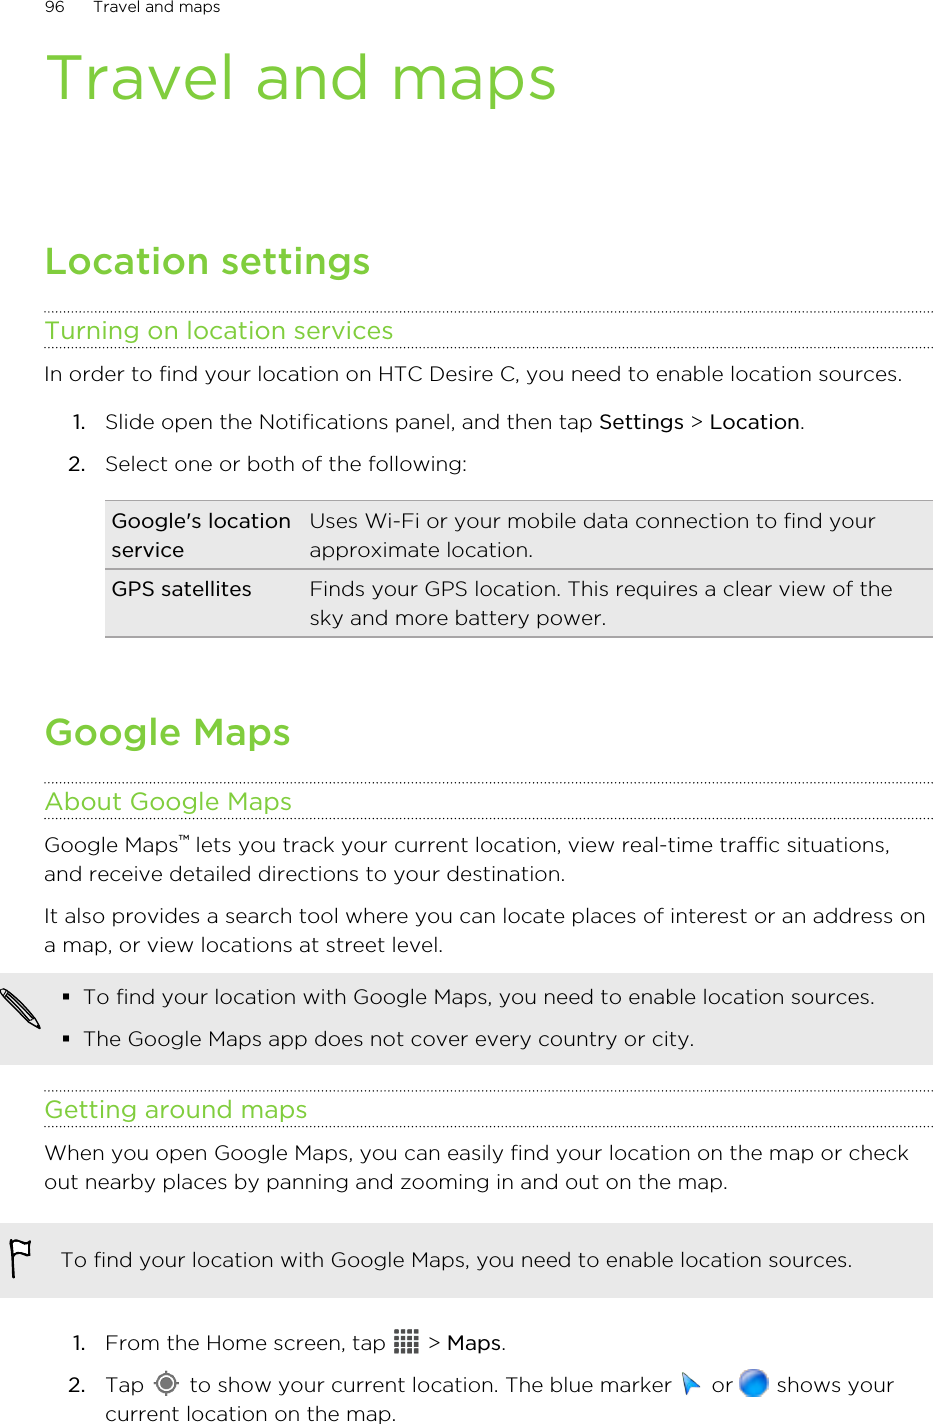 Travel and mapsLocation settingsTurning on location servicesIn order to find your location on HTC Desire C, you need to enable location sources.1. Slide open the Notifications panel, and then tap Settings &gt; Location.2. Select one or both of the following:Google&apos;s locationserviceUses Wi-Fi or your mobile data connection to find yourapproximate location.GPS satellites Finds your GPS location. This requires a clear view of thesky and more battery power.Google MapsAbout Google MapsGoogle Maps™ lets you track your current location, view real-time traffic situations,and receive detailed directions to your destination.It also provides a search tool where you can locate places of interest or an address ona map, or view locations at street level.§To find your location with Google Maps, you need to enable location sources.§The Google Maps app does not cover every country or city.Getting around mapsWhen you open Google Maps, you can easily find your location on the map or checkout nearby places by panning and zooming in and out on the map.To find your location with Google Maps, you need to enable location sources.1. From the Home screen, tap   &gt; Maps.2. Tap   to show your current location. The blue marker   or   shows yourcurrent location on the map.96 Travel and maps